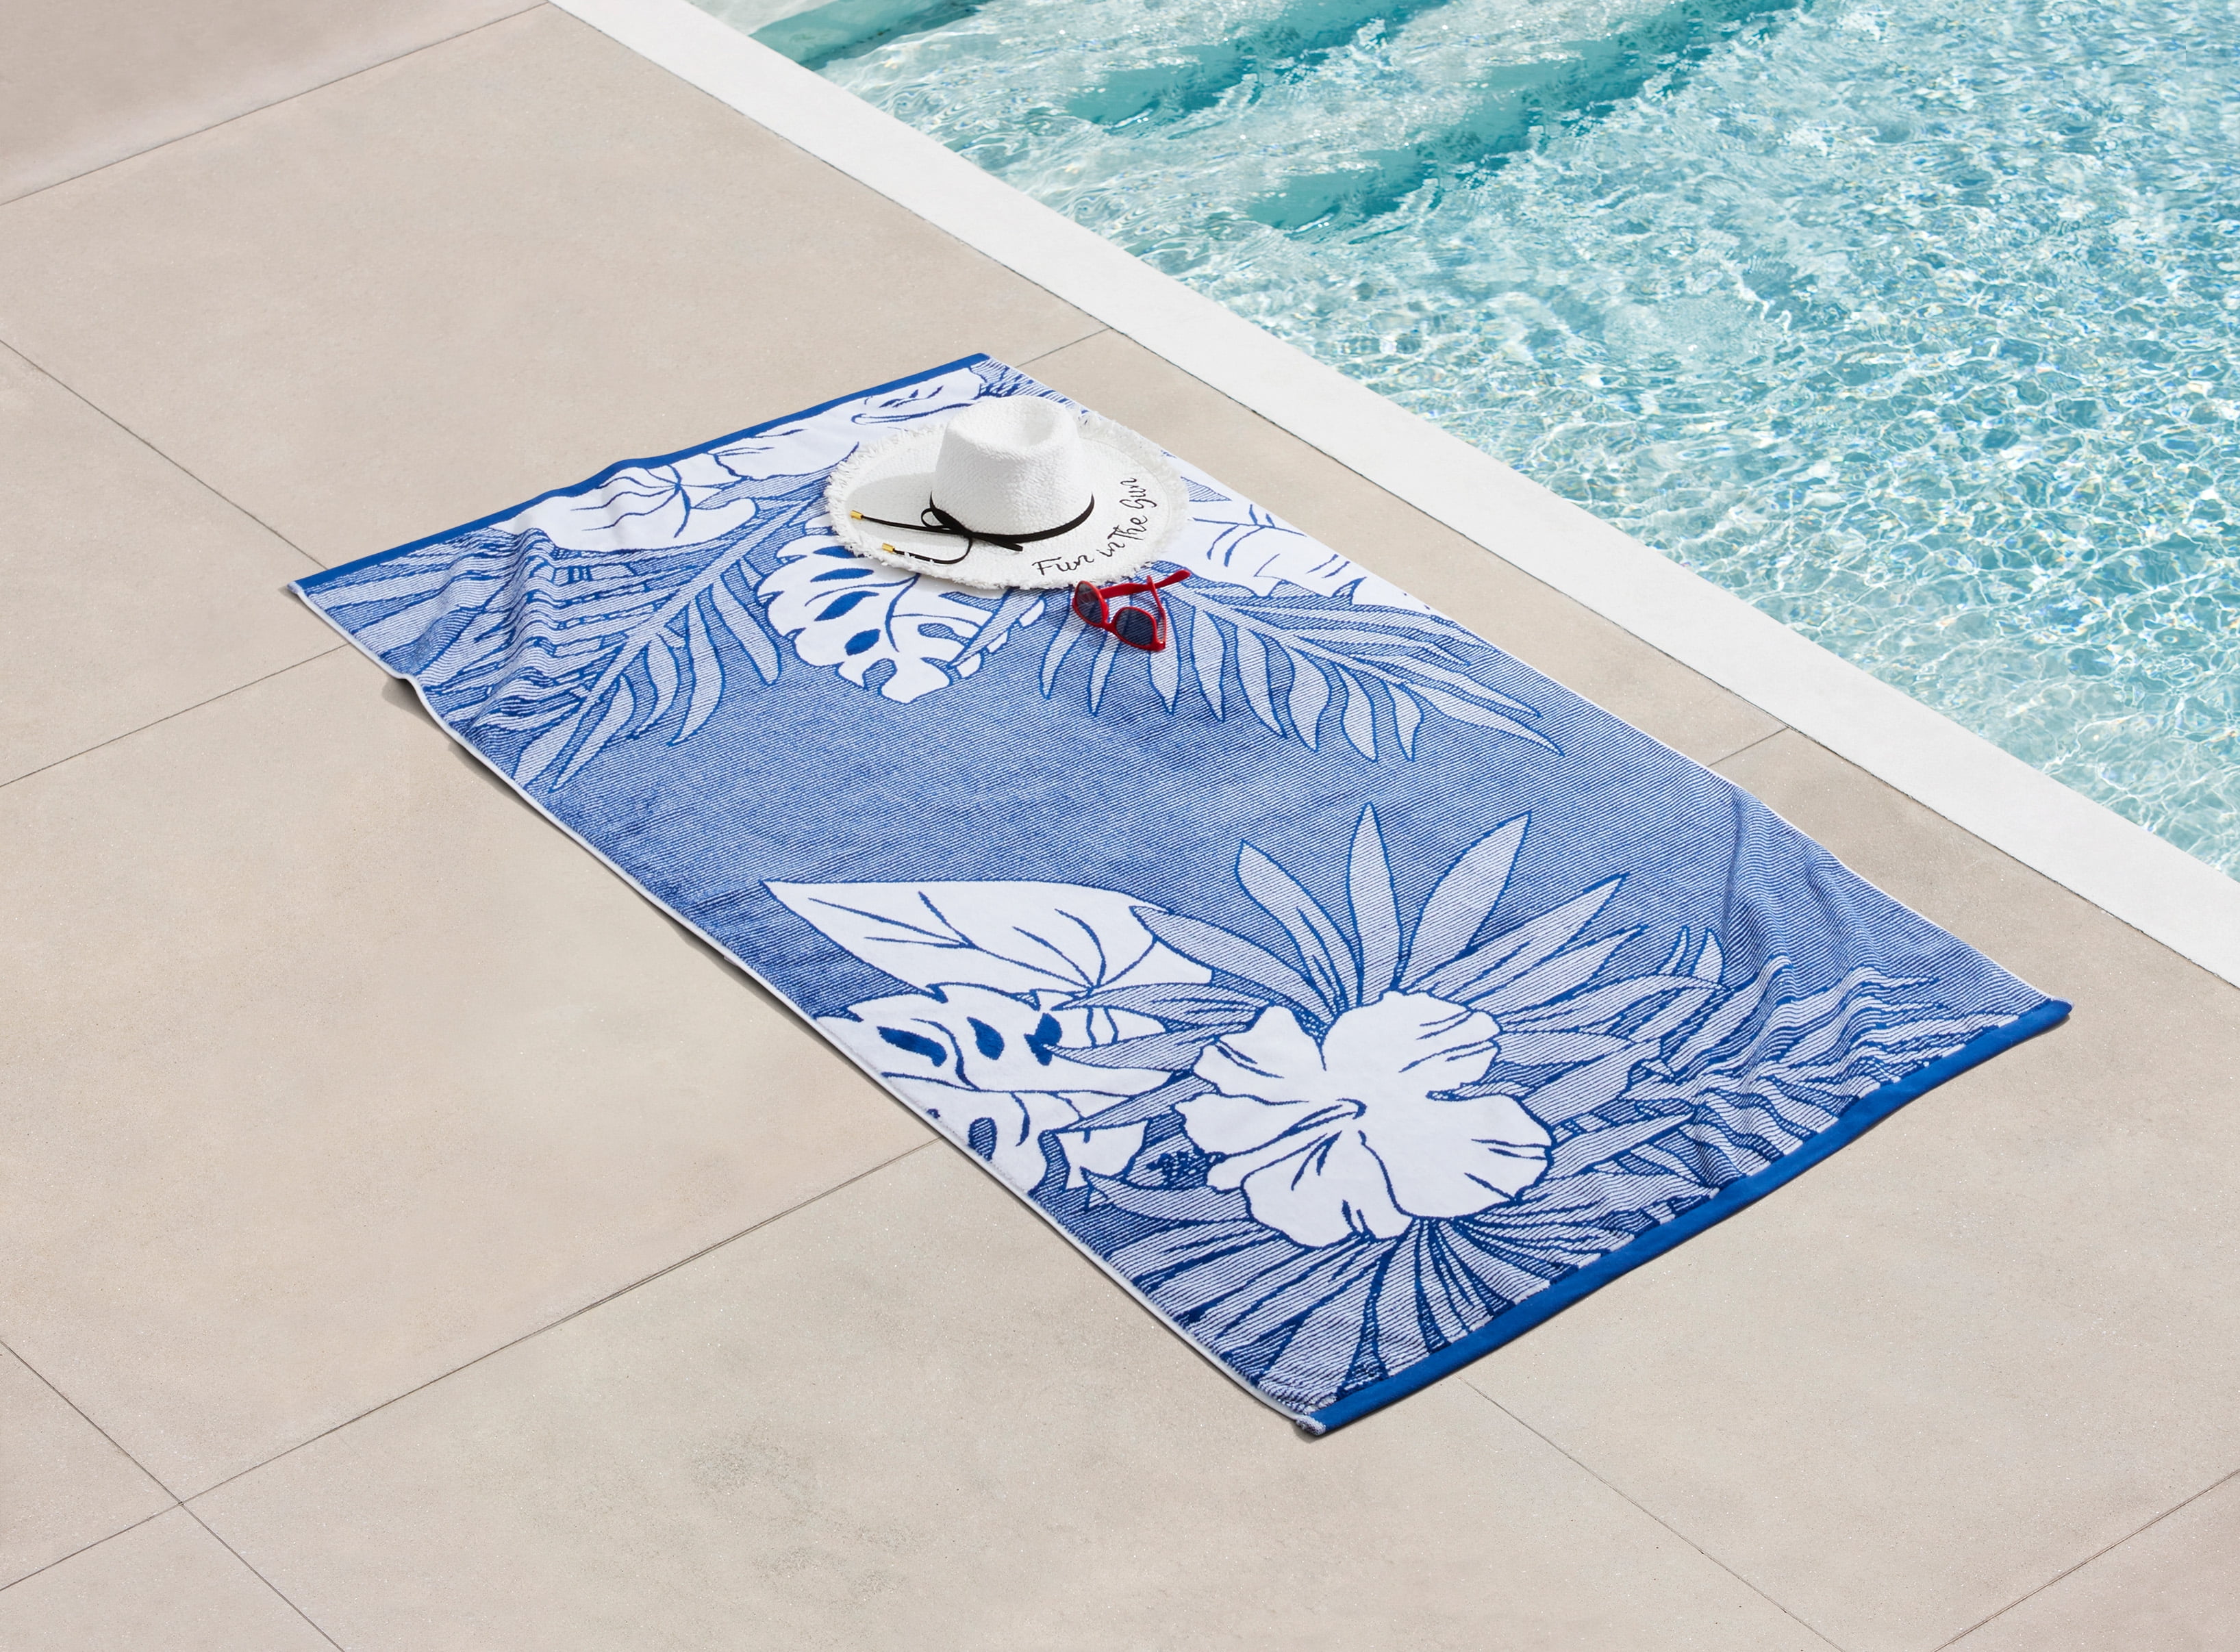 OTVEE Lavender Flowers Beach Towels Oversized 71x31in Extra Large Pool  Towel with Mesh Storage Bag, Lightweight Sand Free Quick Dry Beach Towel  Travel